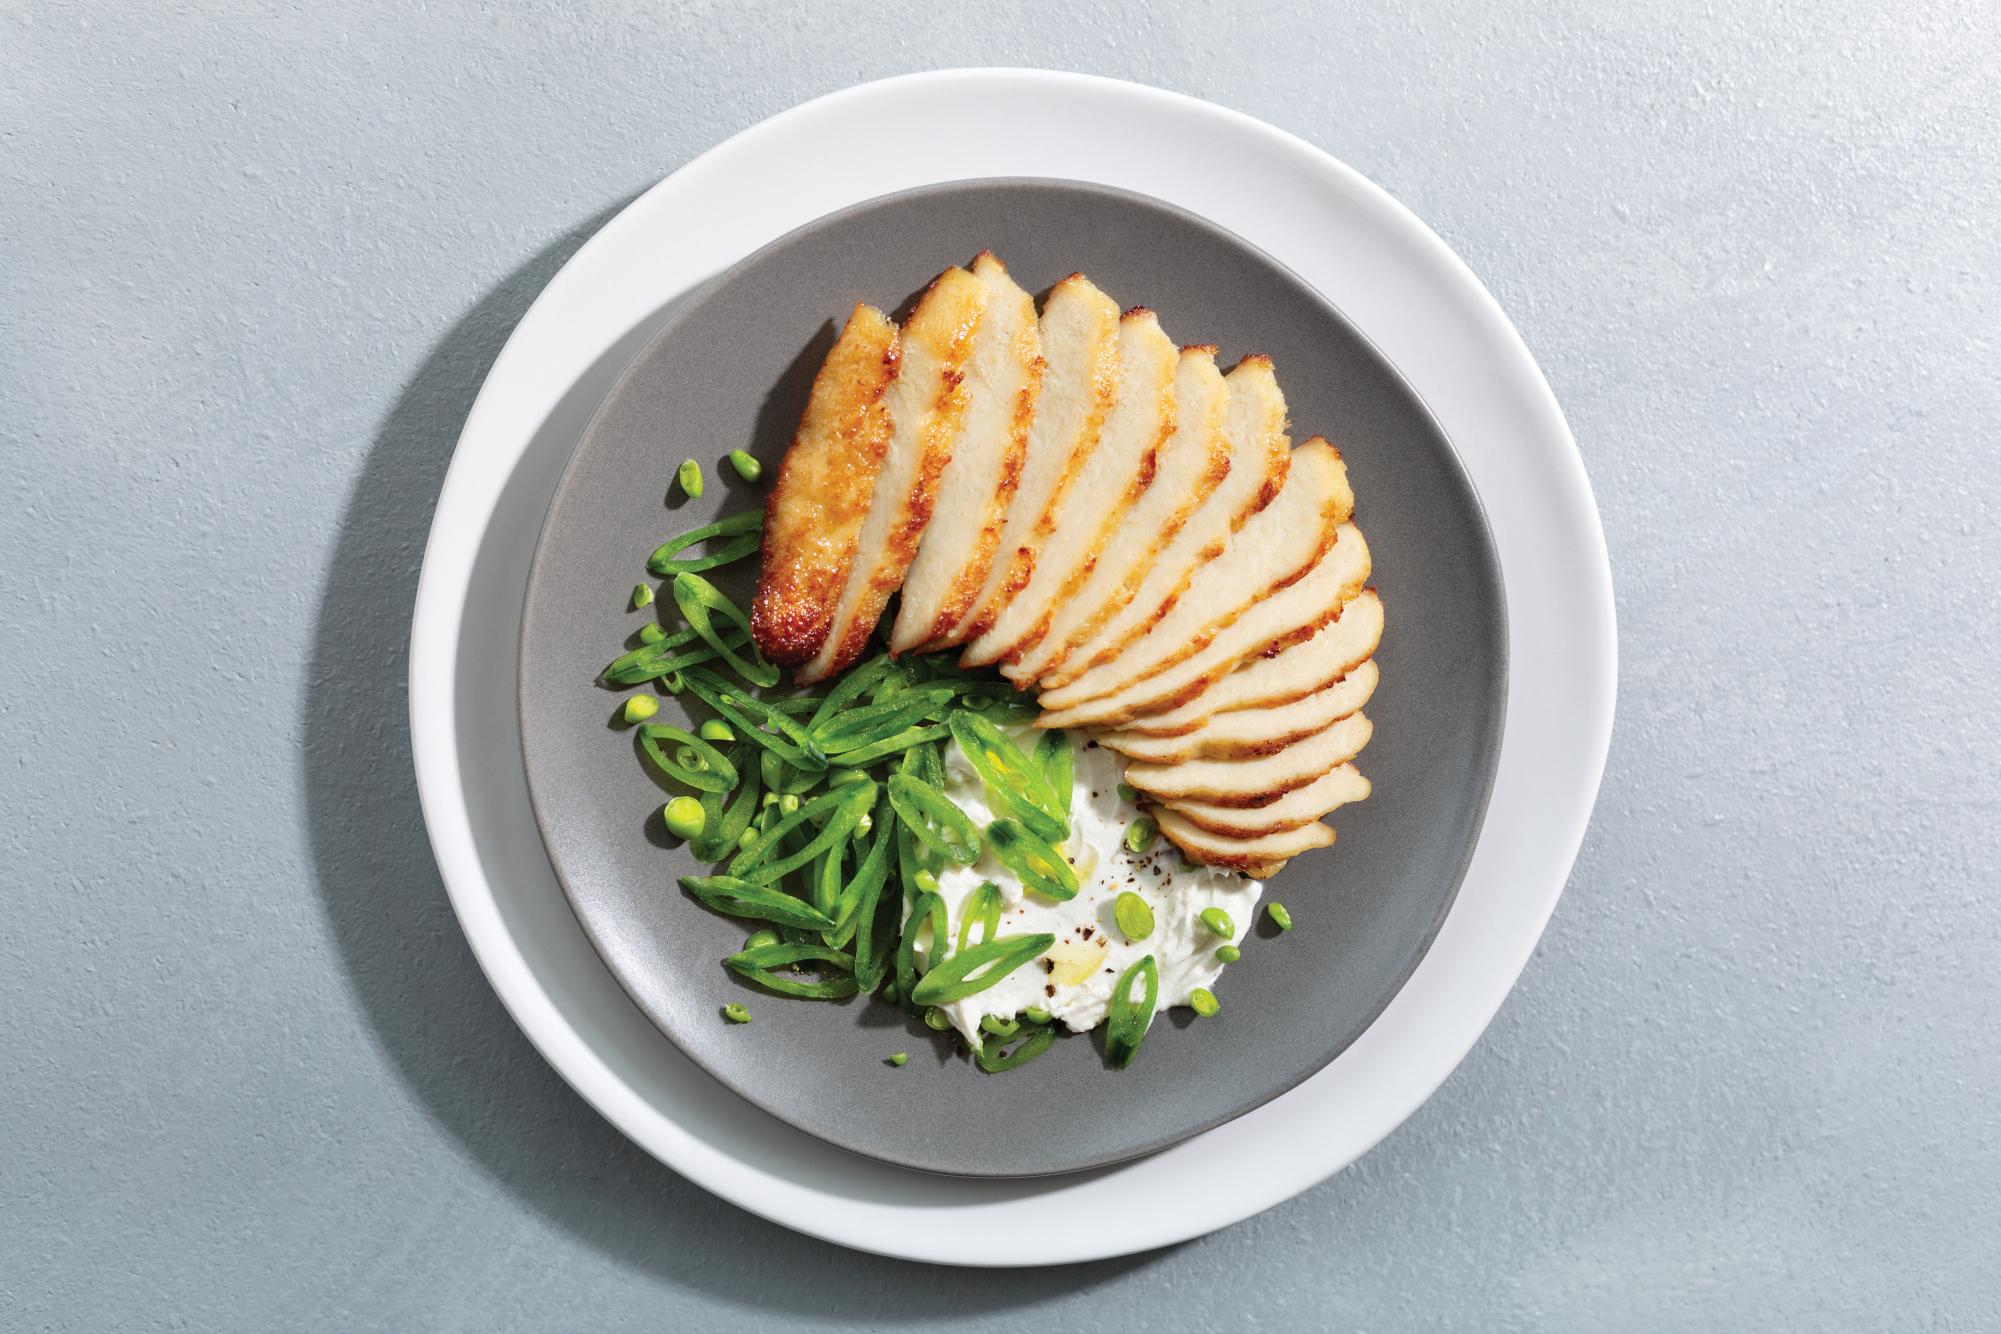 Chicken breasts are one of upside foods cultivated dishes. Photo by Upside Foods Press Kit. Used with permission.